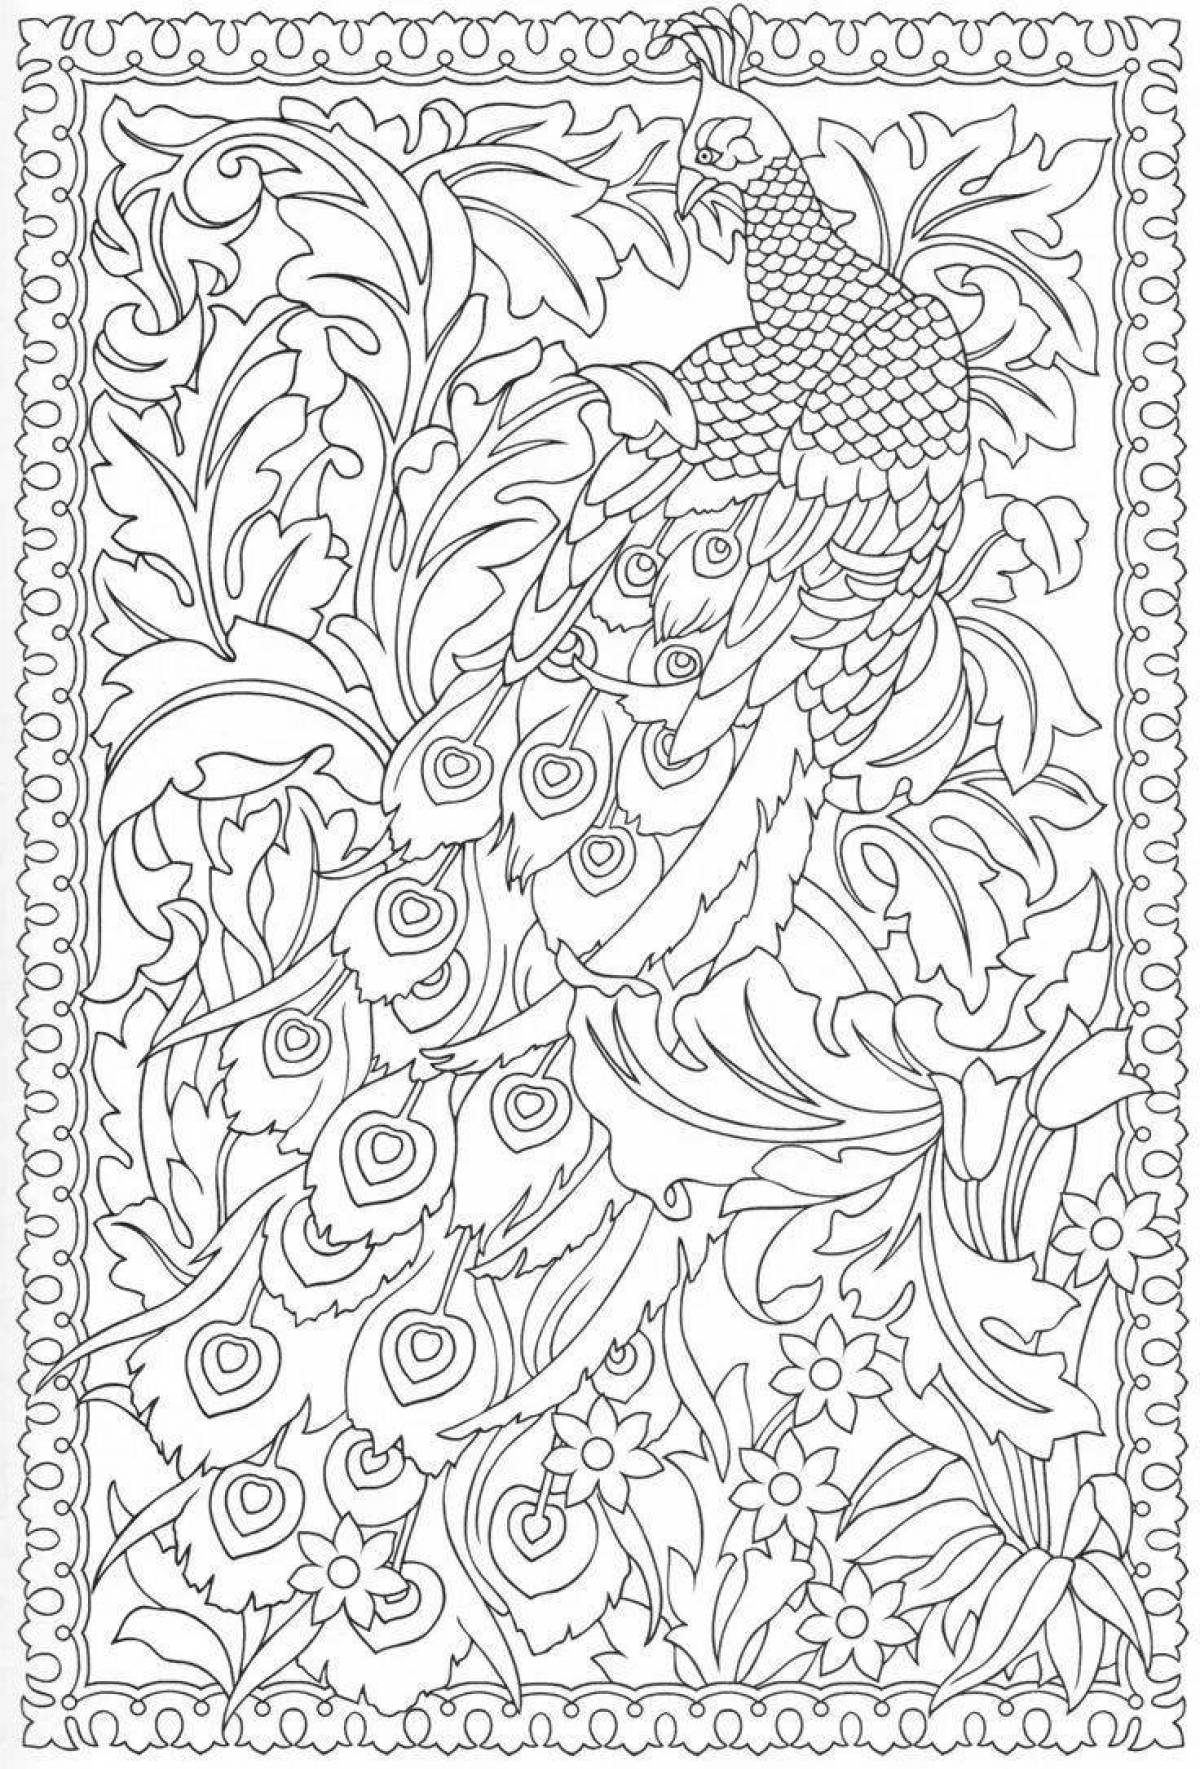 Adorable coloring pages for adults